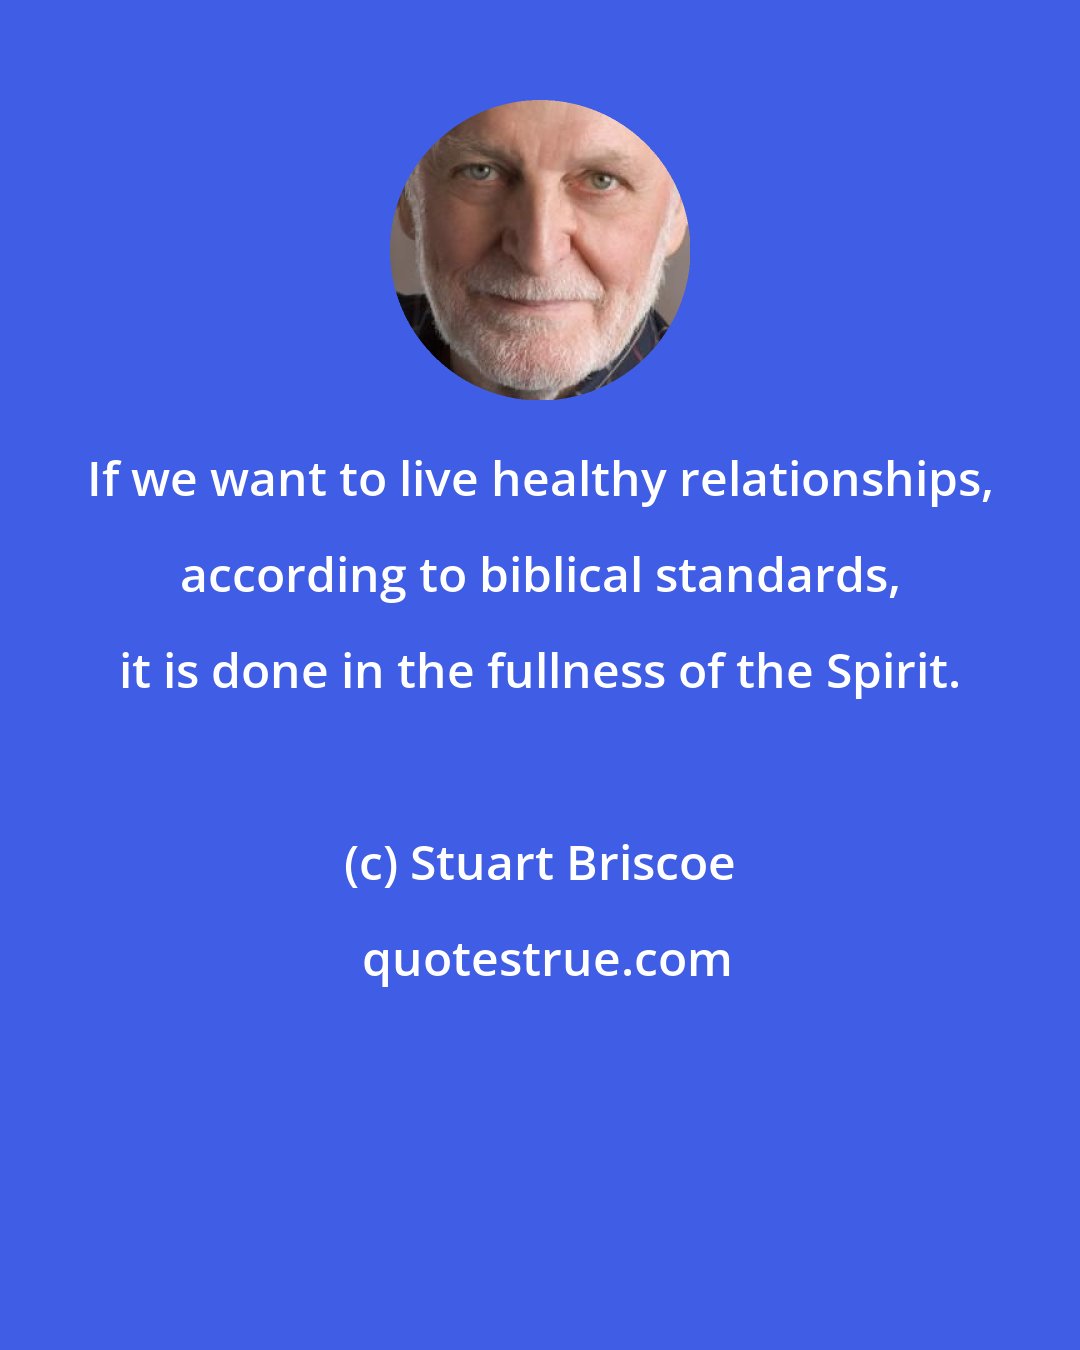 Stuart Briscoe: If we want to live healthy relationships, according to biblical standards, it is done in the fullness of the Spirit.